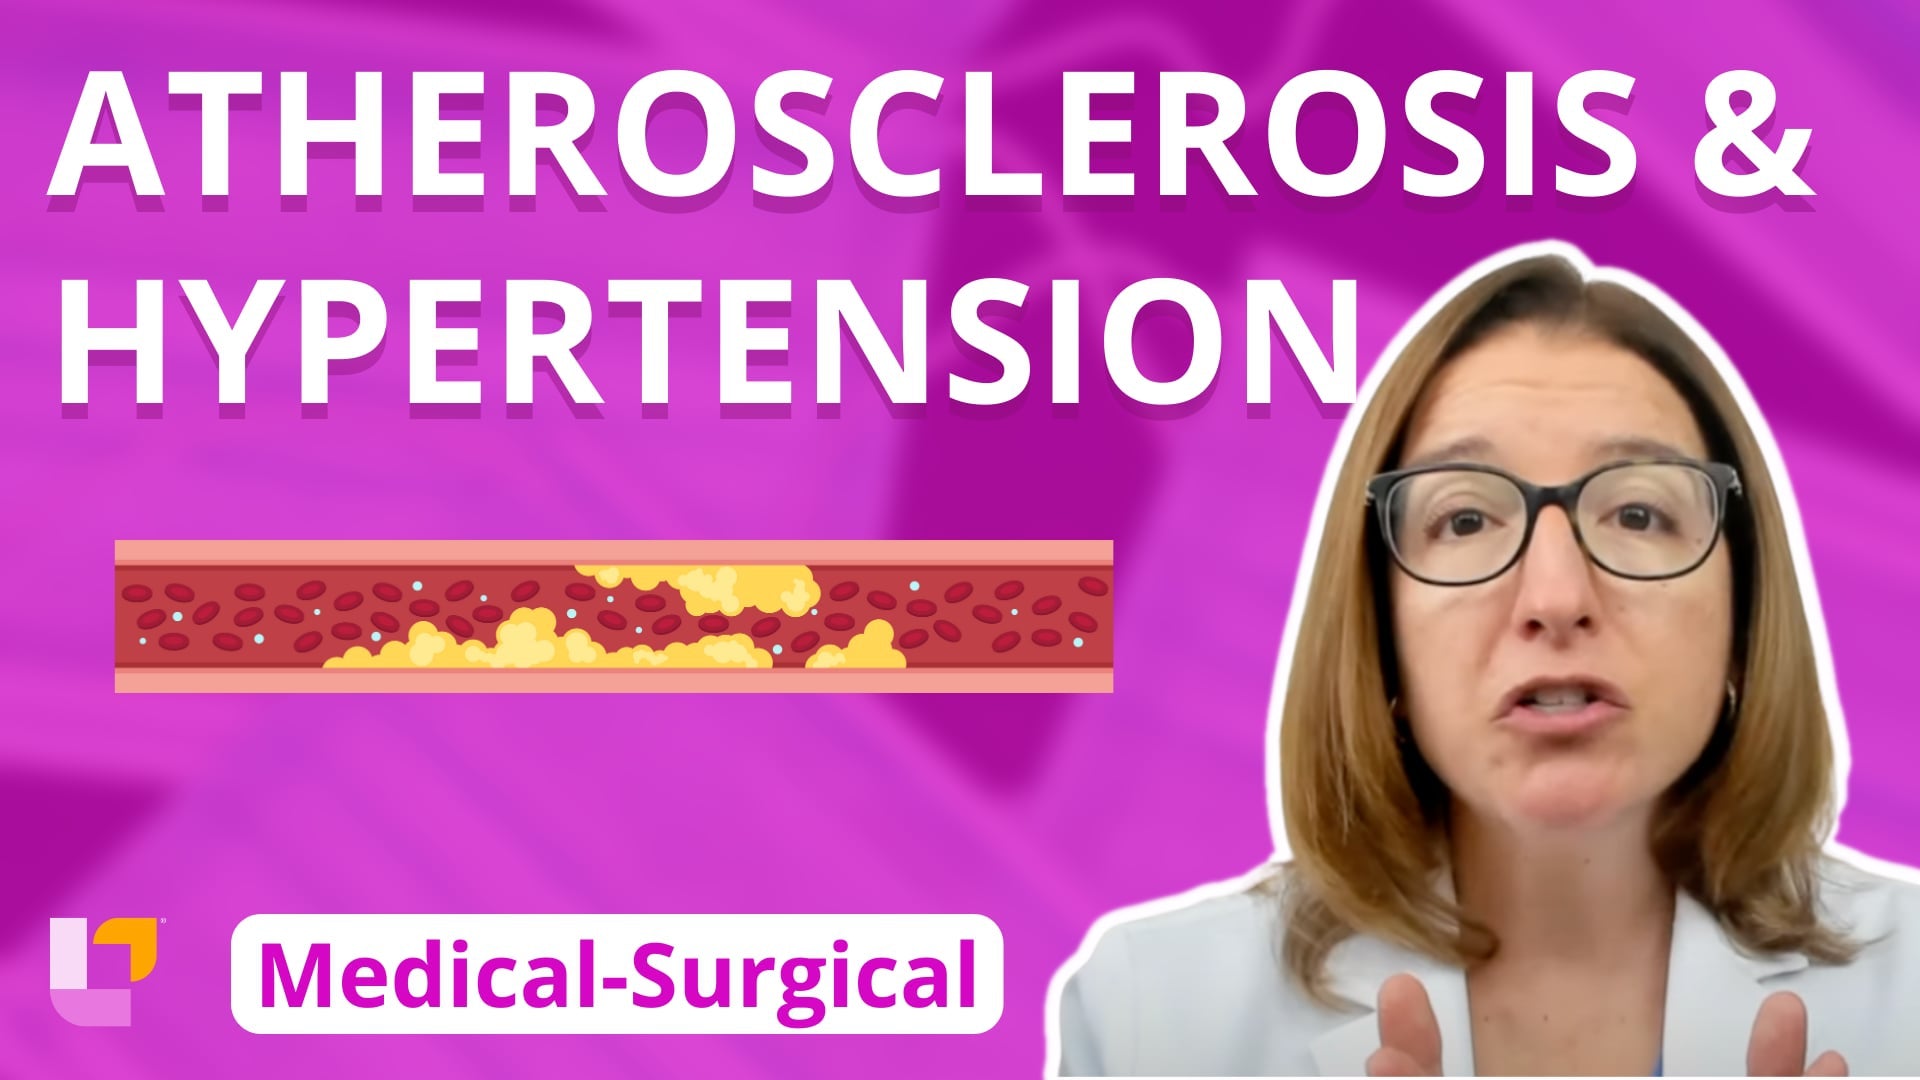 Med-Surg - Cardiovascular System, part 11: Atherosclerosis and Hypertension - LevelUpRN